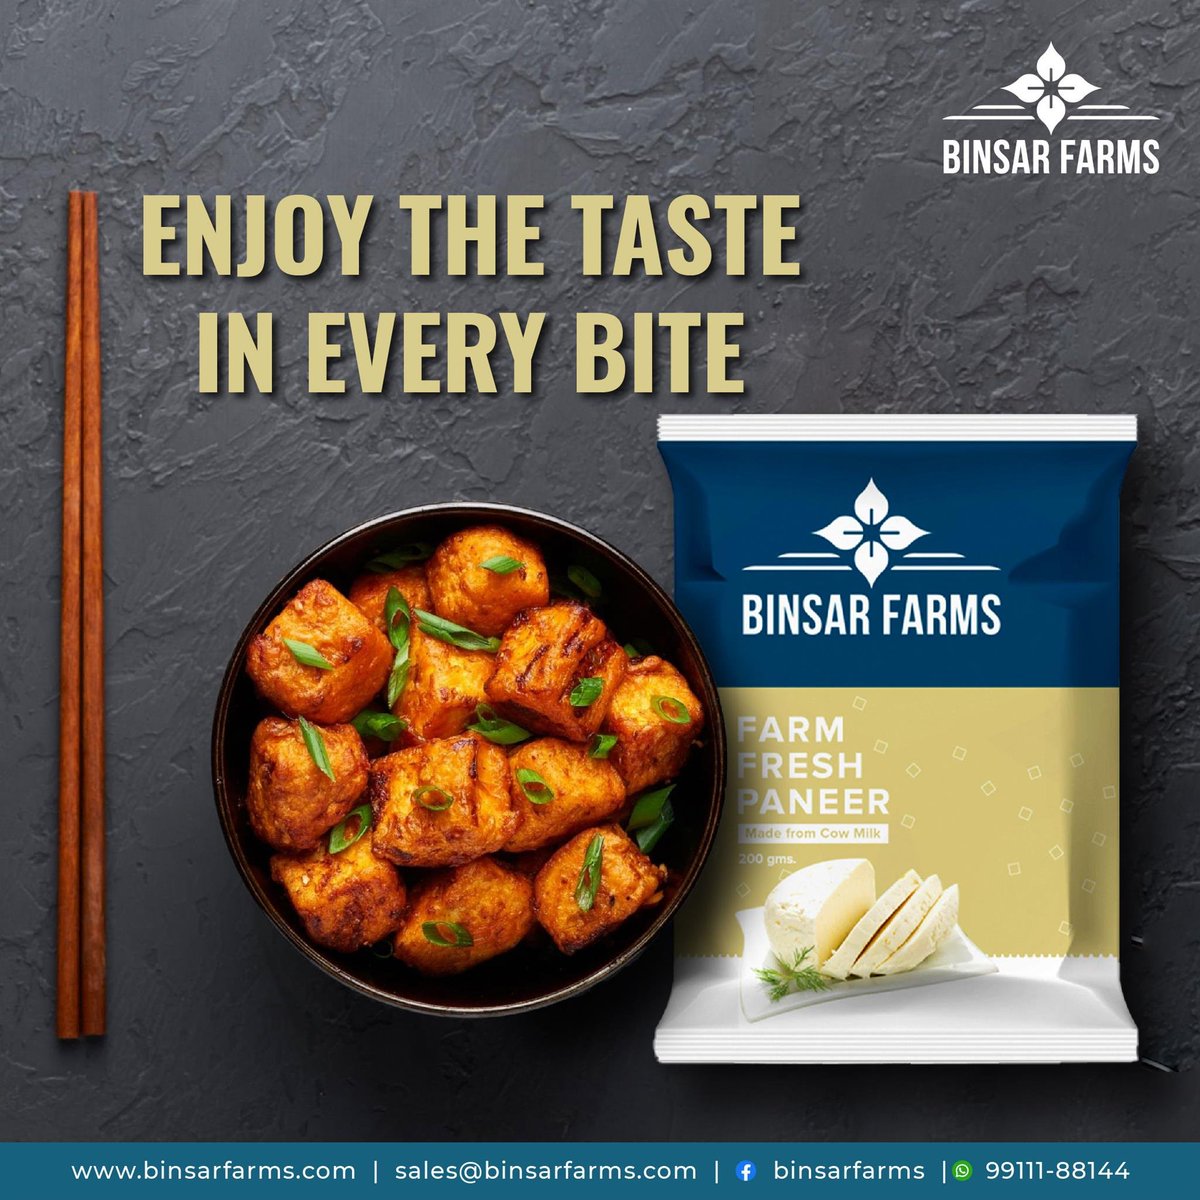 Feeling the winter chill? Warm up with a #delicious plate of #ChillyPaneer made with #BinsarFarm's fresh and creamy paneer. Our #paneer is made from pure, high-quality milk and has a rich, creamy texture that makes it perfect for any dish.
bit.ly/3sC3DjM